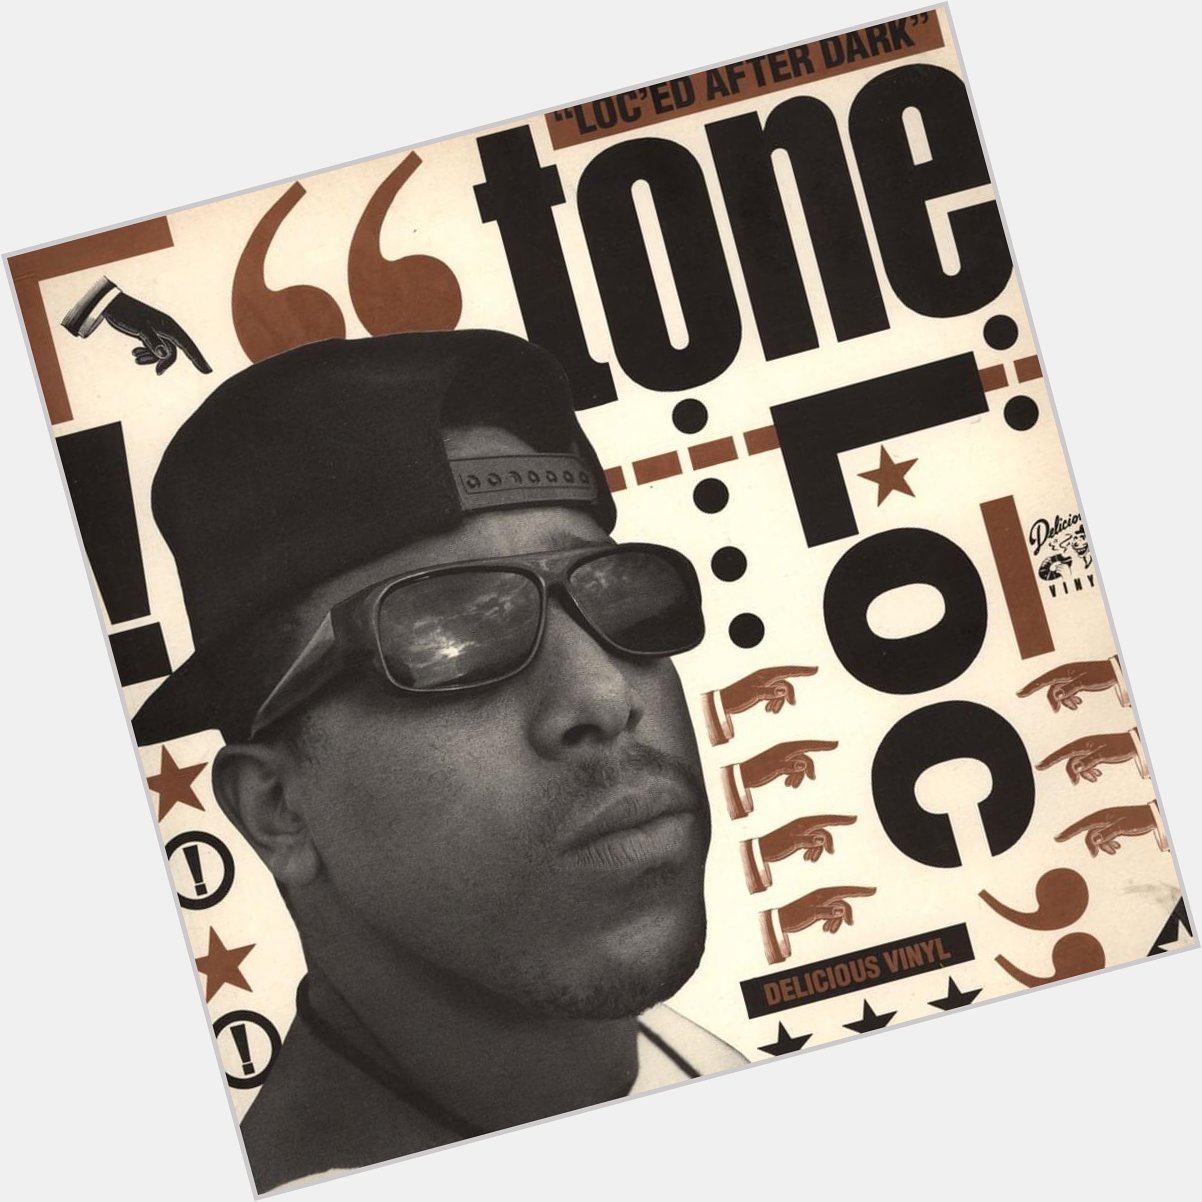 Happy birthday to American actor, rapper, voice actor, and producer Tone Loc, born March 3, 1966. 